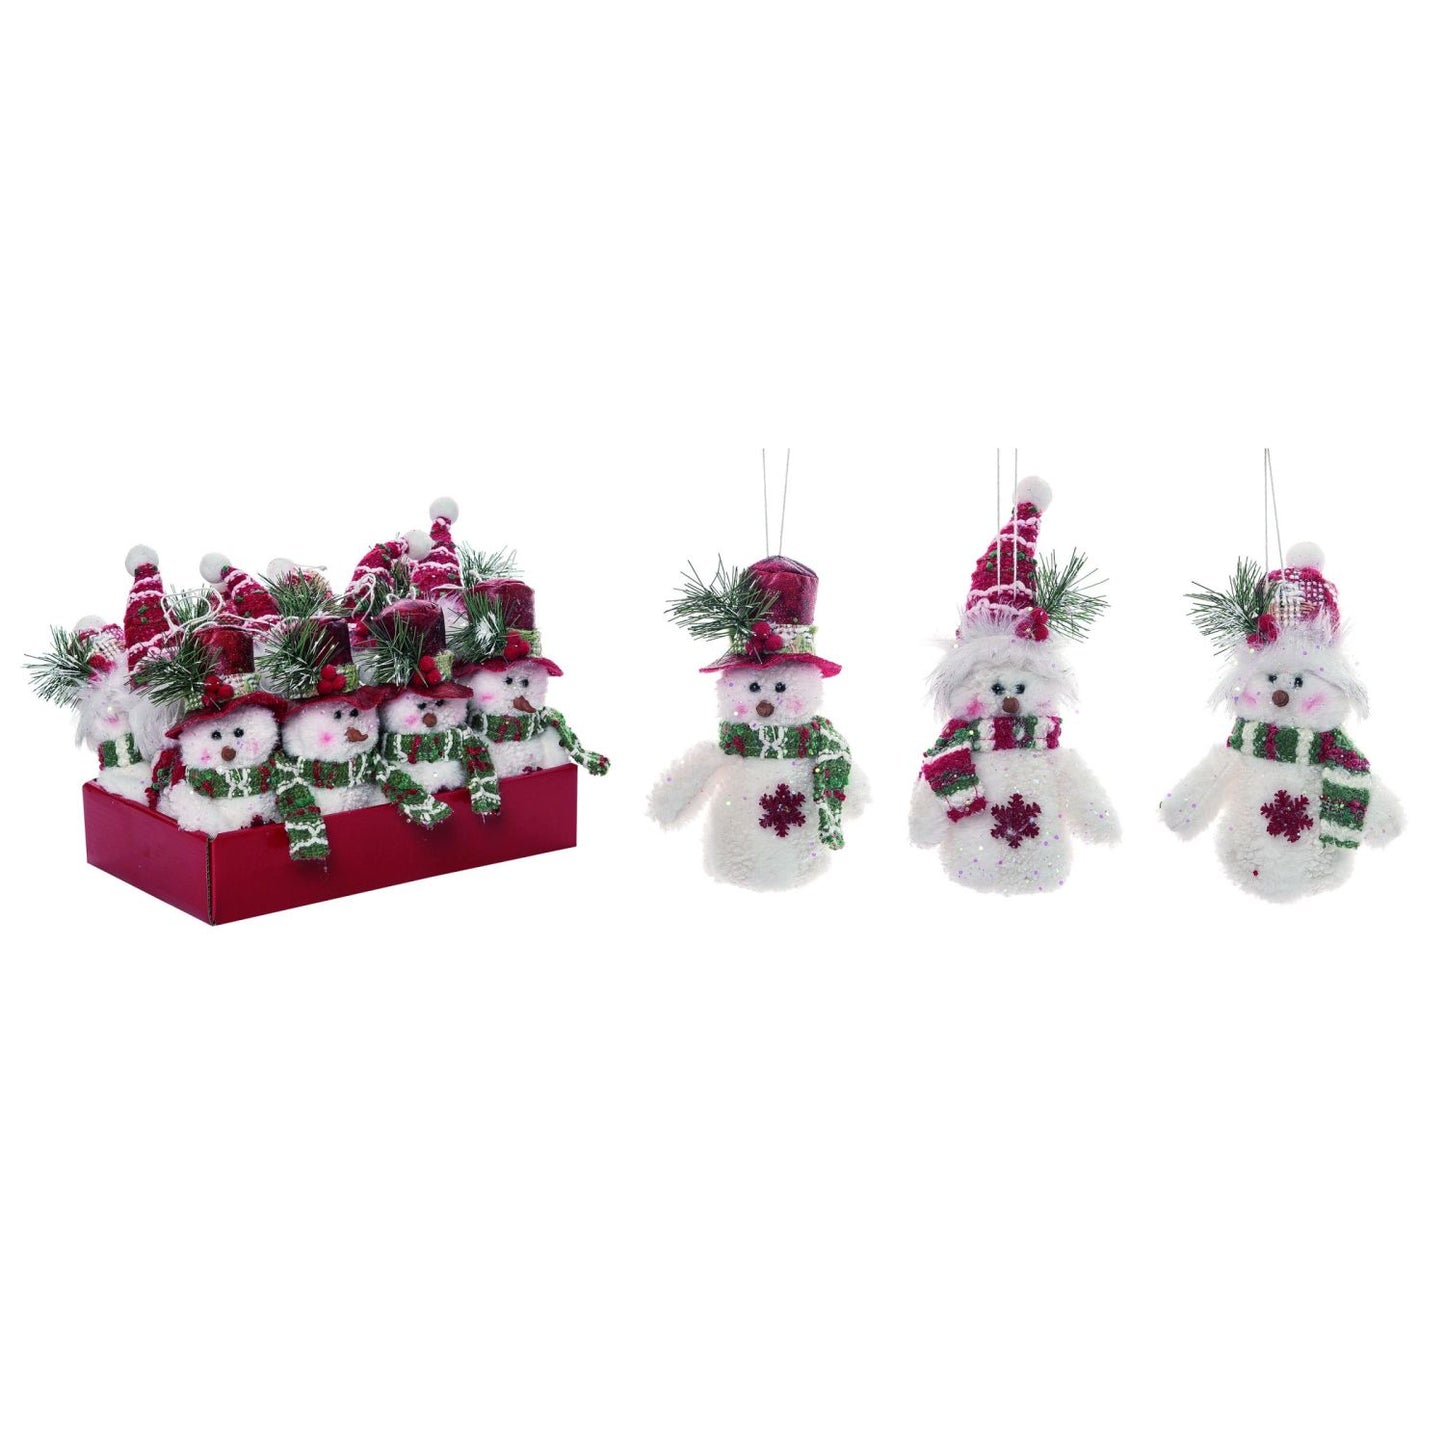 Transpac Plush Jolly Snowman Ornament  In Crate Set Of 12